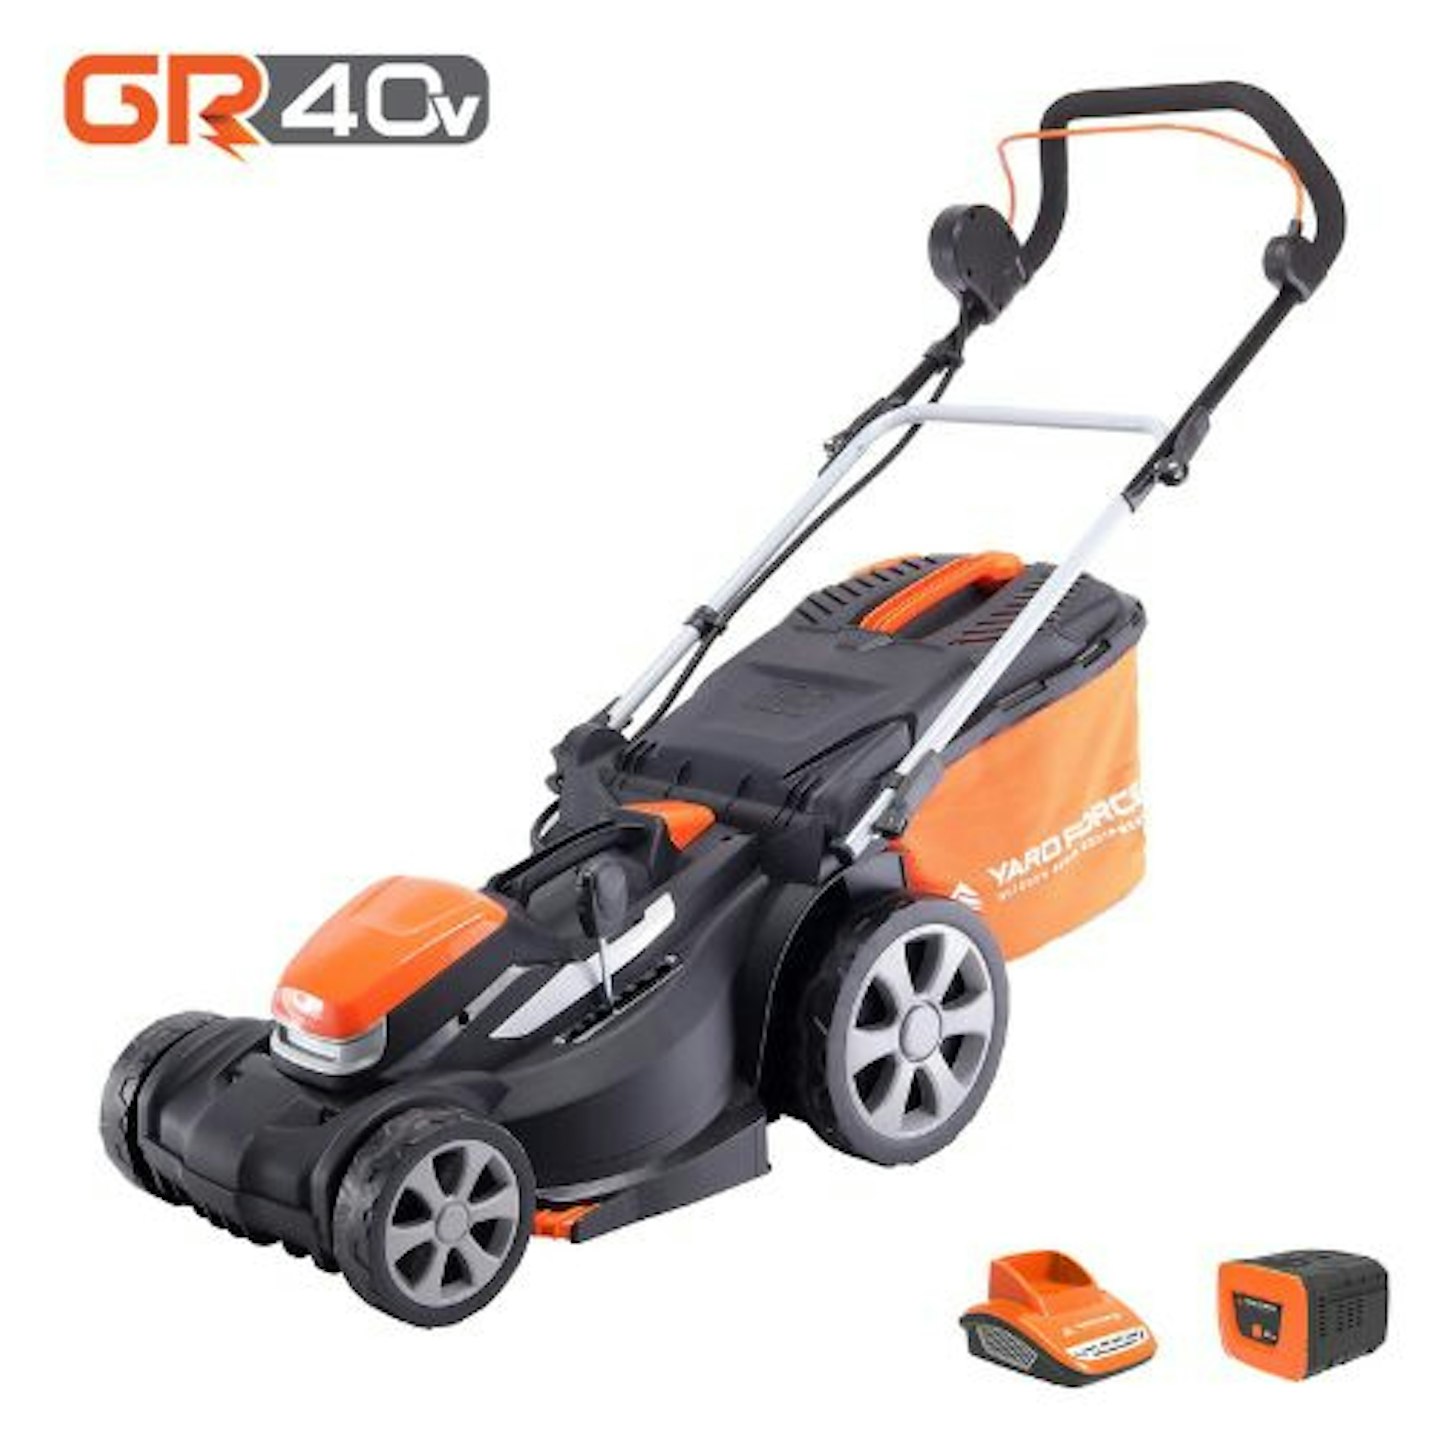 Yard Force 40V 37cm Cordless Lawnmower with Lithium-ion Battery and Quick Charger LM G37A